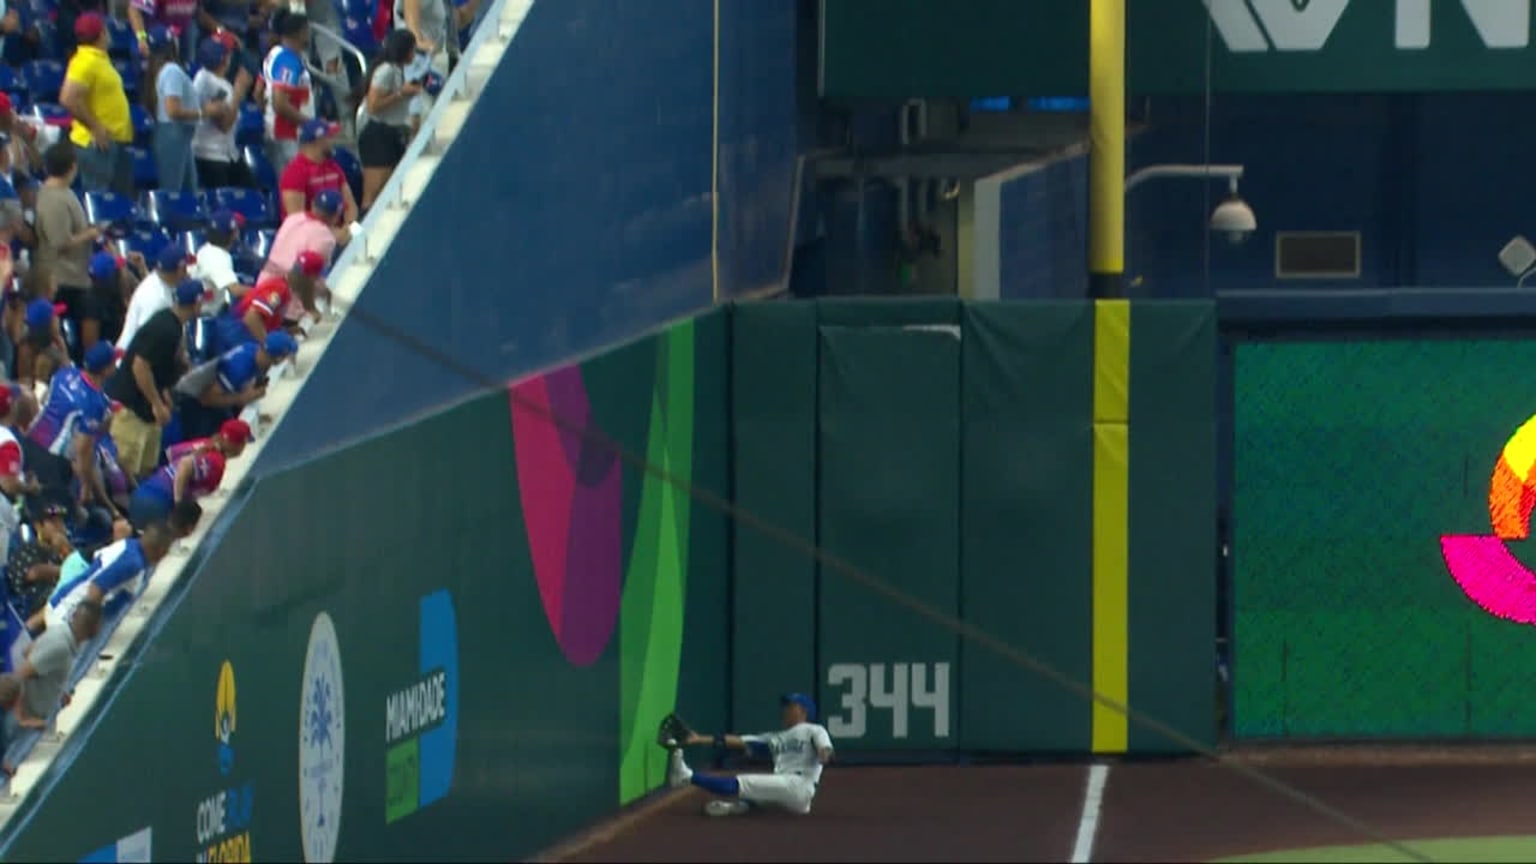 A screengrab of a player sliding against a wall in foul territory